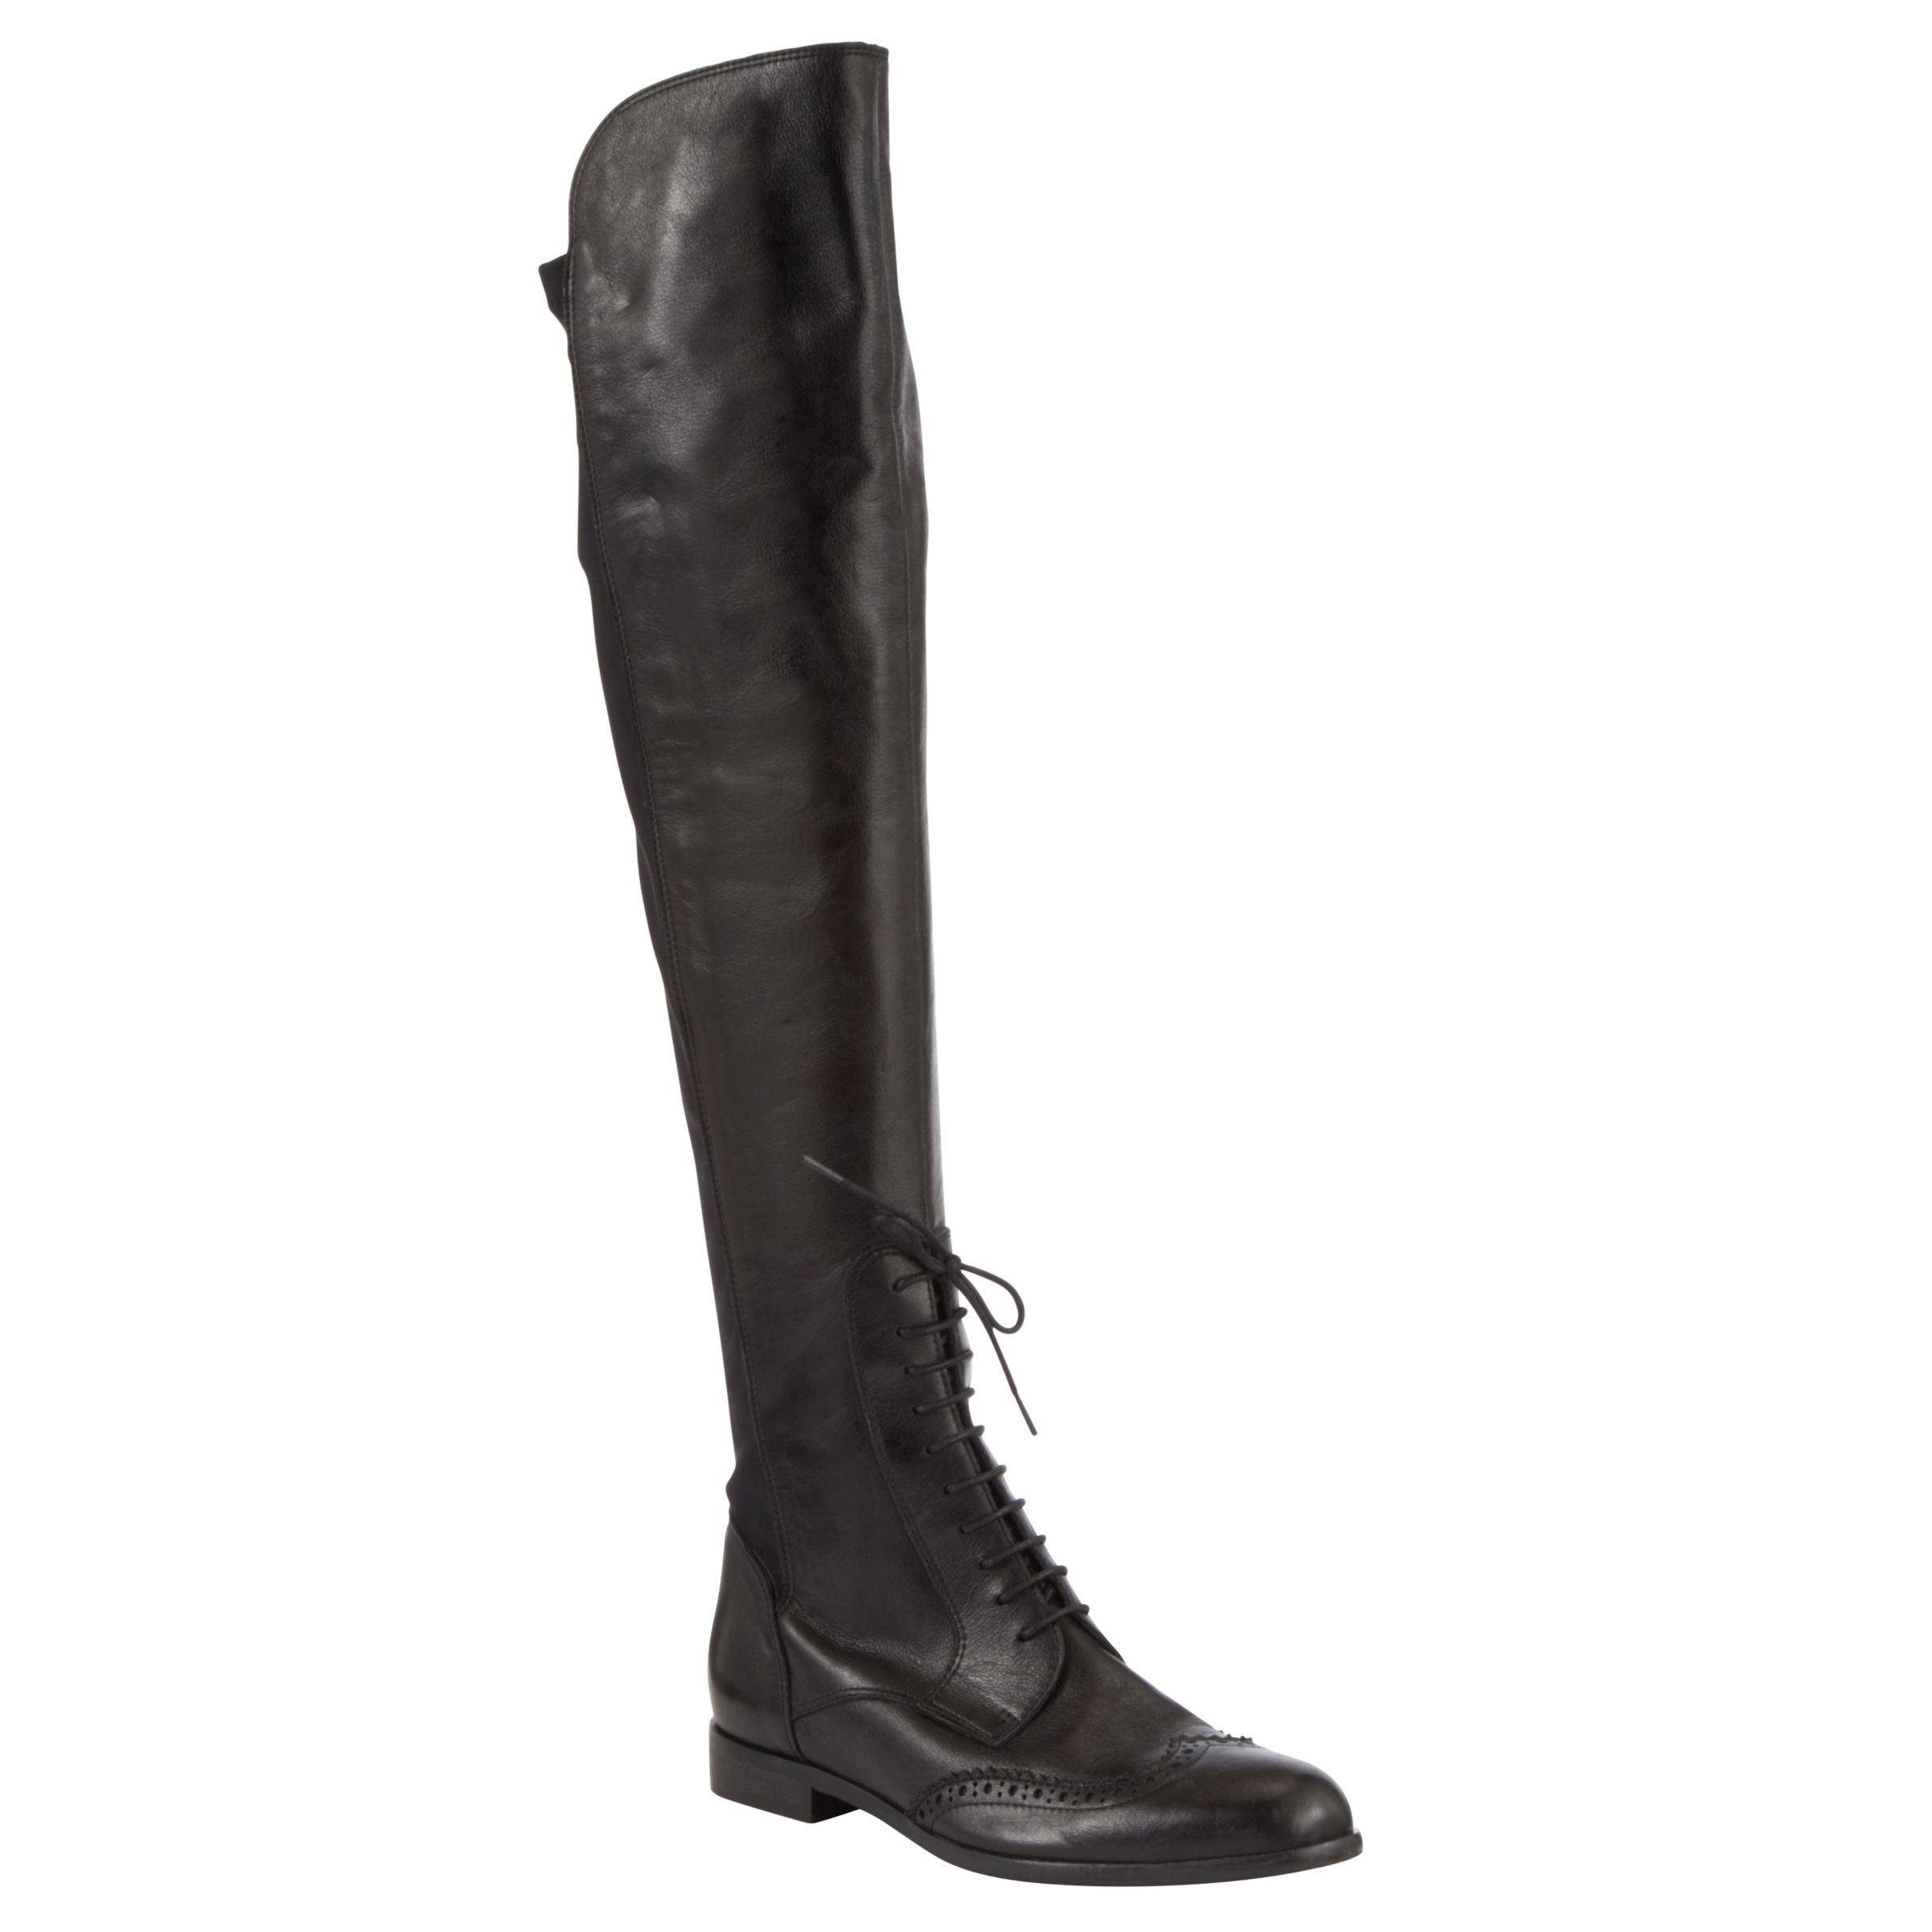 Somerset by Alice Temperley Cromwell Leather Over the Knee Boots, Black